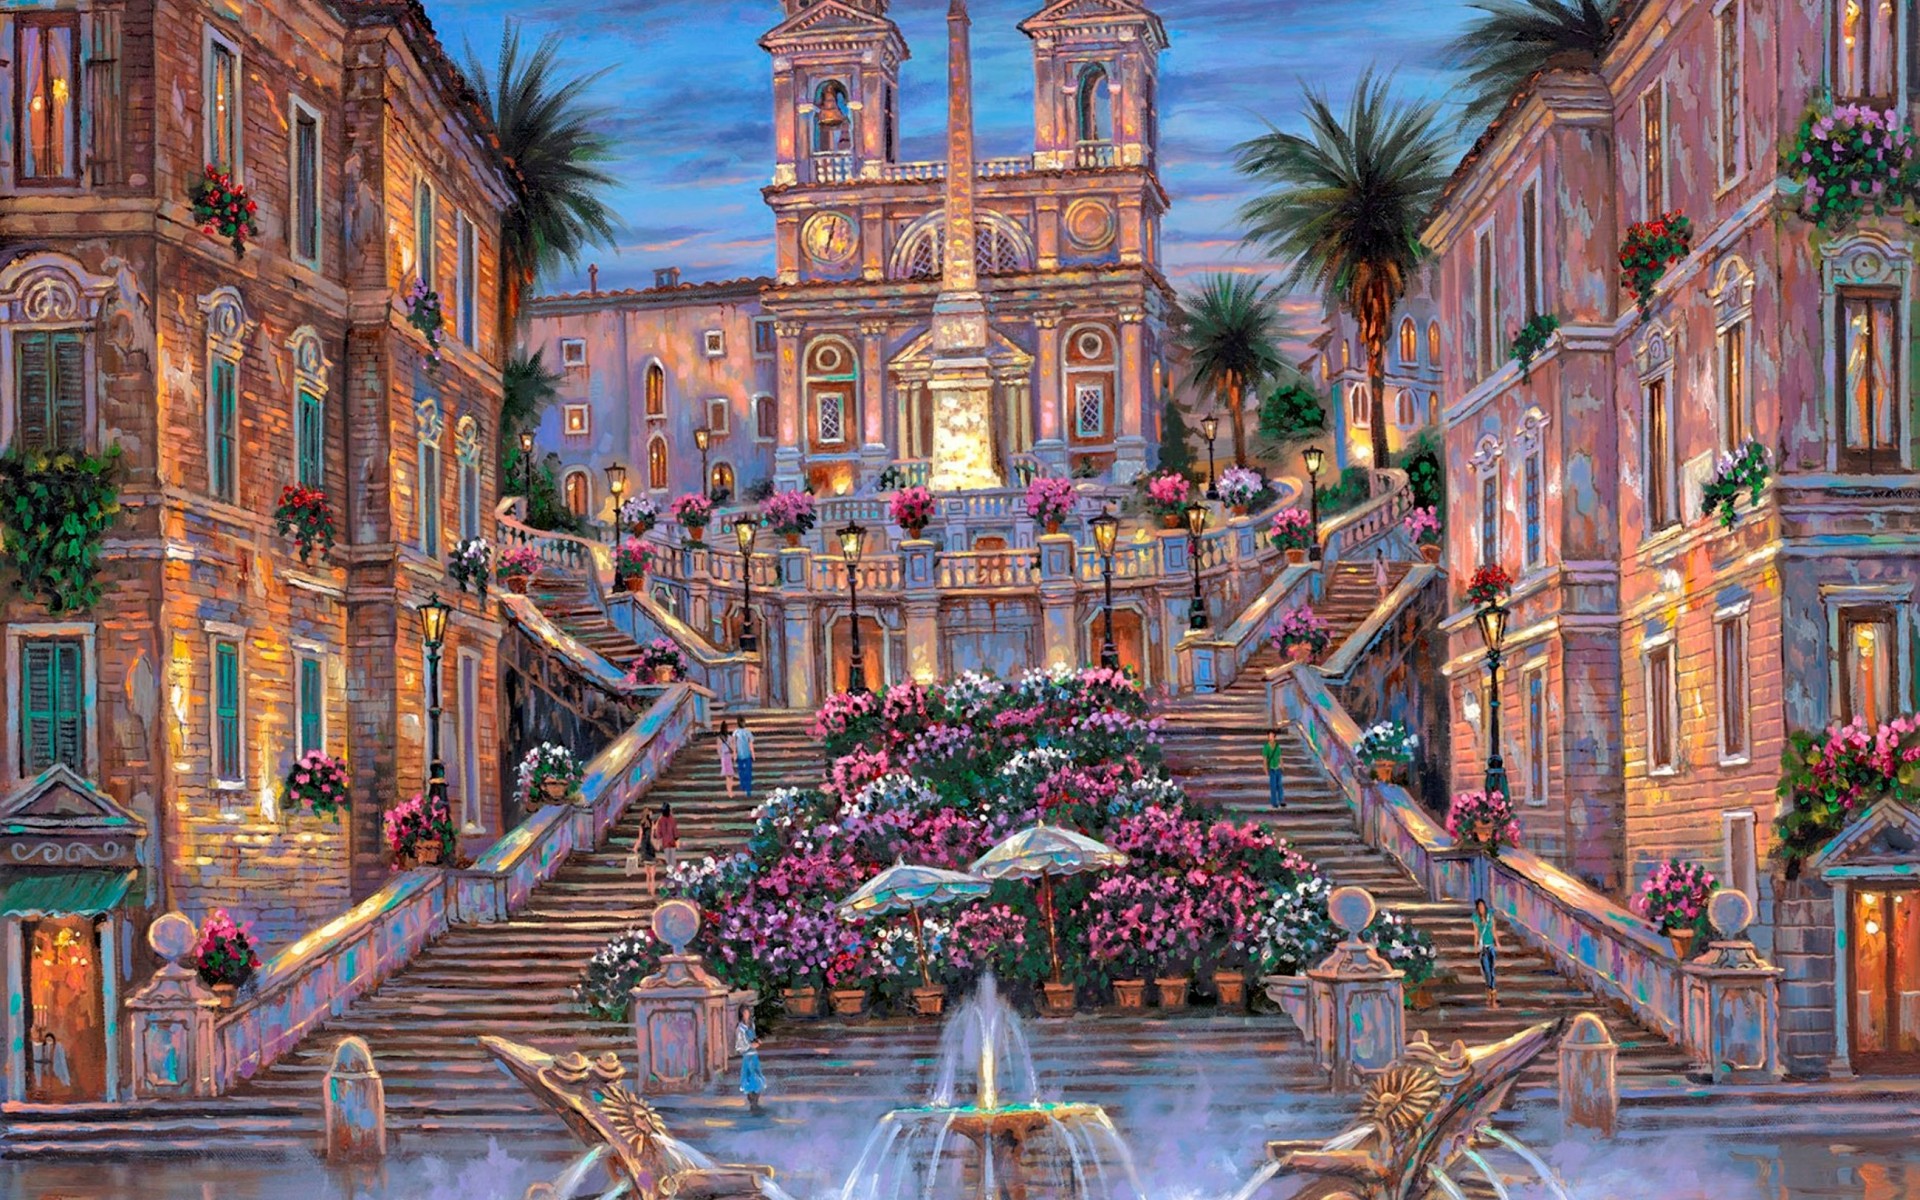 robert, Finale, Rome, Spanish, Steps, Paintings, Detail, Place, Italy, Flowers, Architecture, Buildings, Cathedral, Church, Color, Art, Artistic, Sky, Clouds, Stairs, Window, Statue, Trees, Fountain, Water Wallpaper